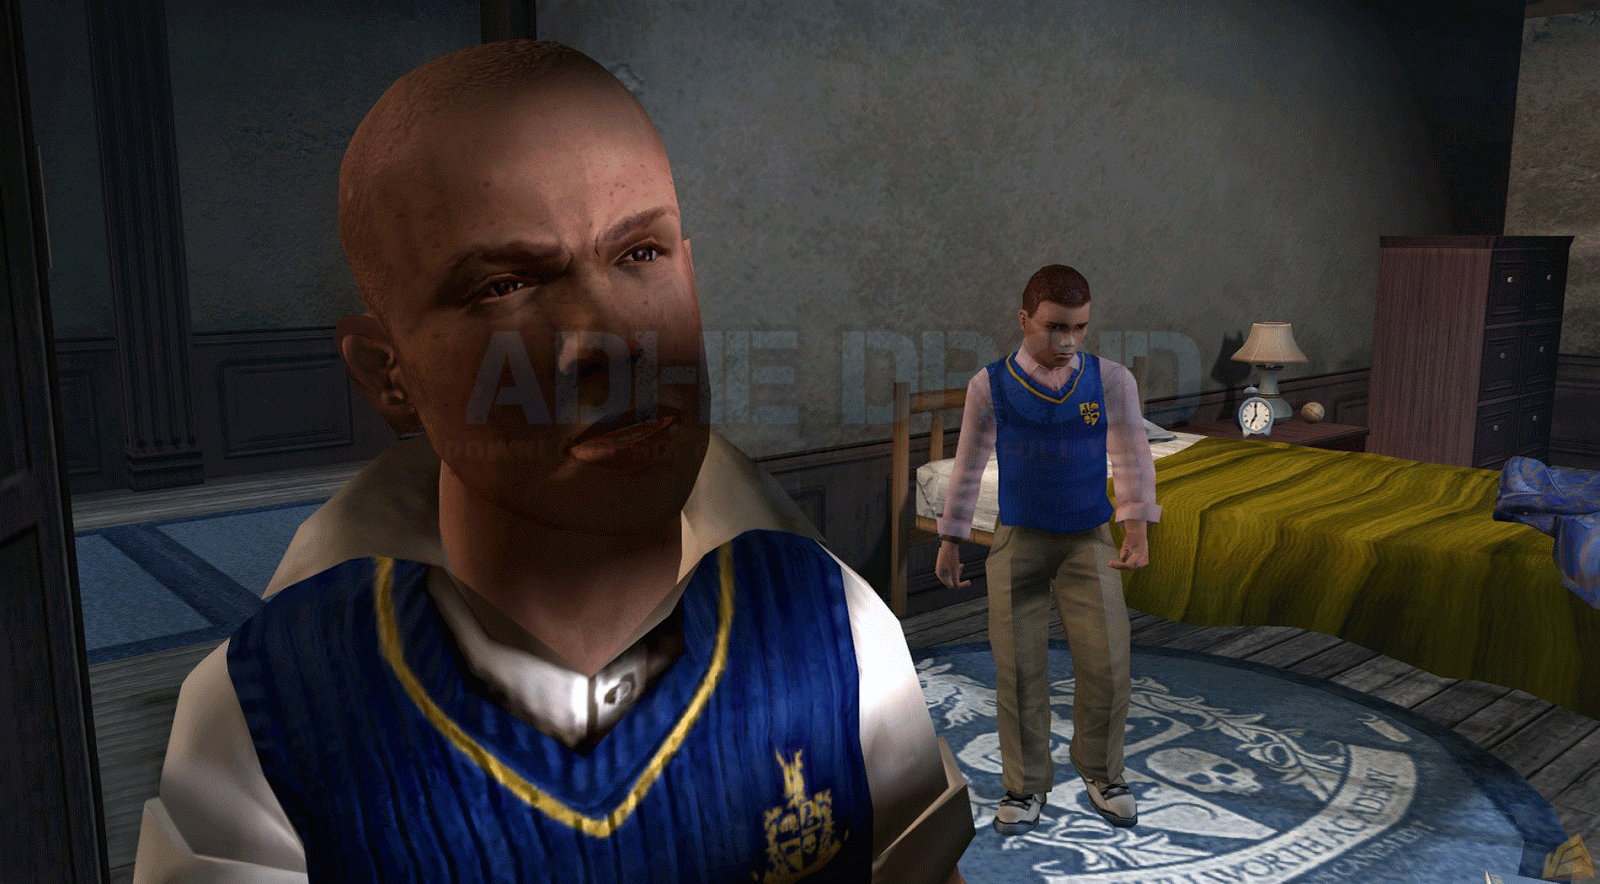 Download Game Bully Pc Full Version Single Link Chipscelestial